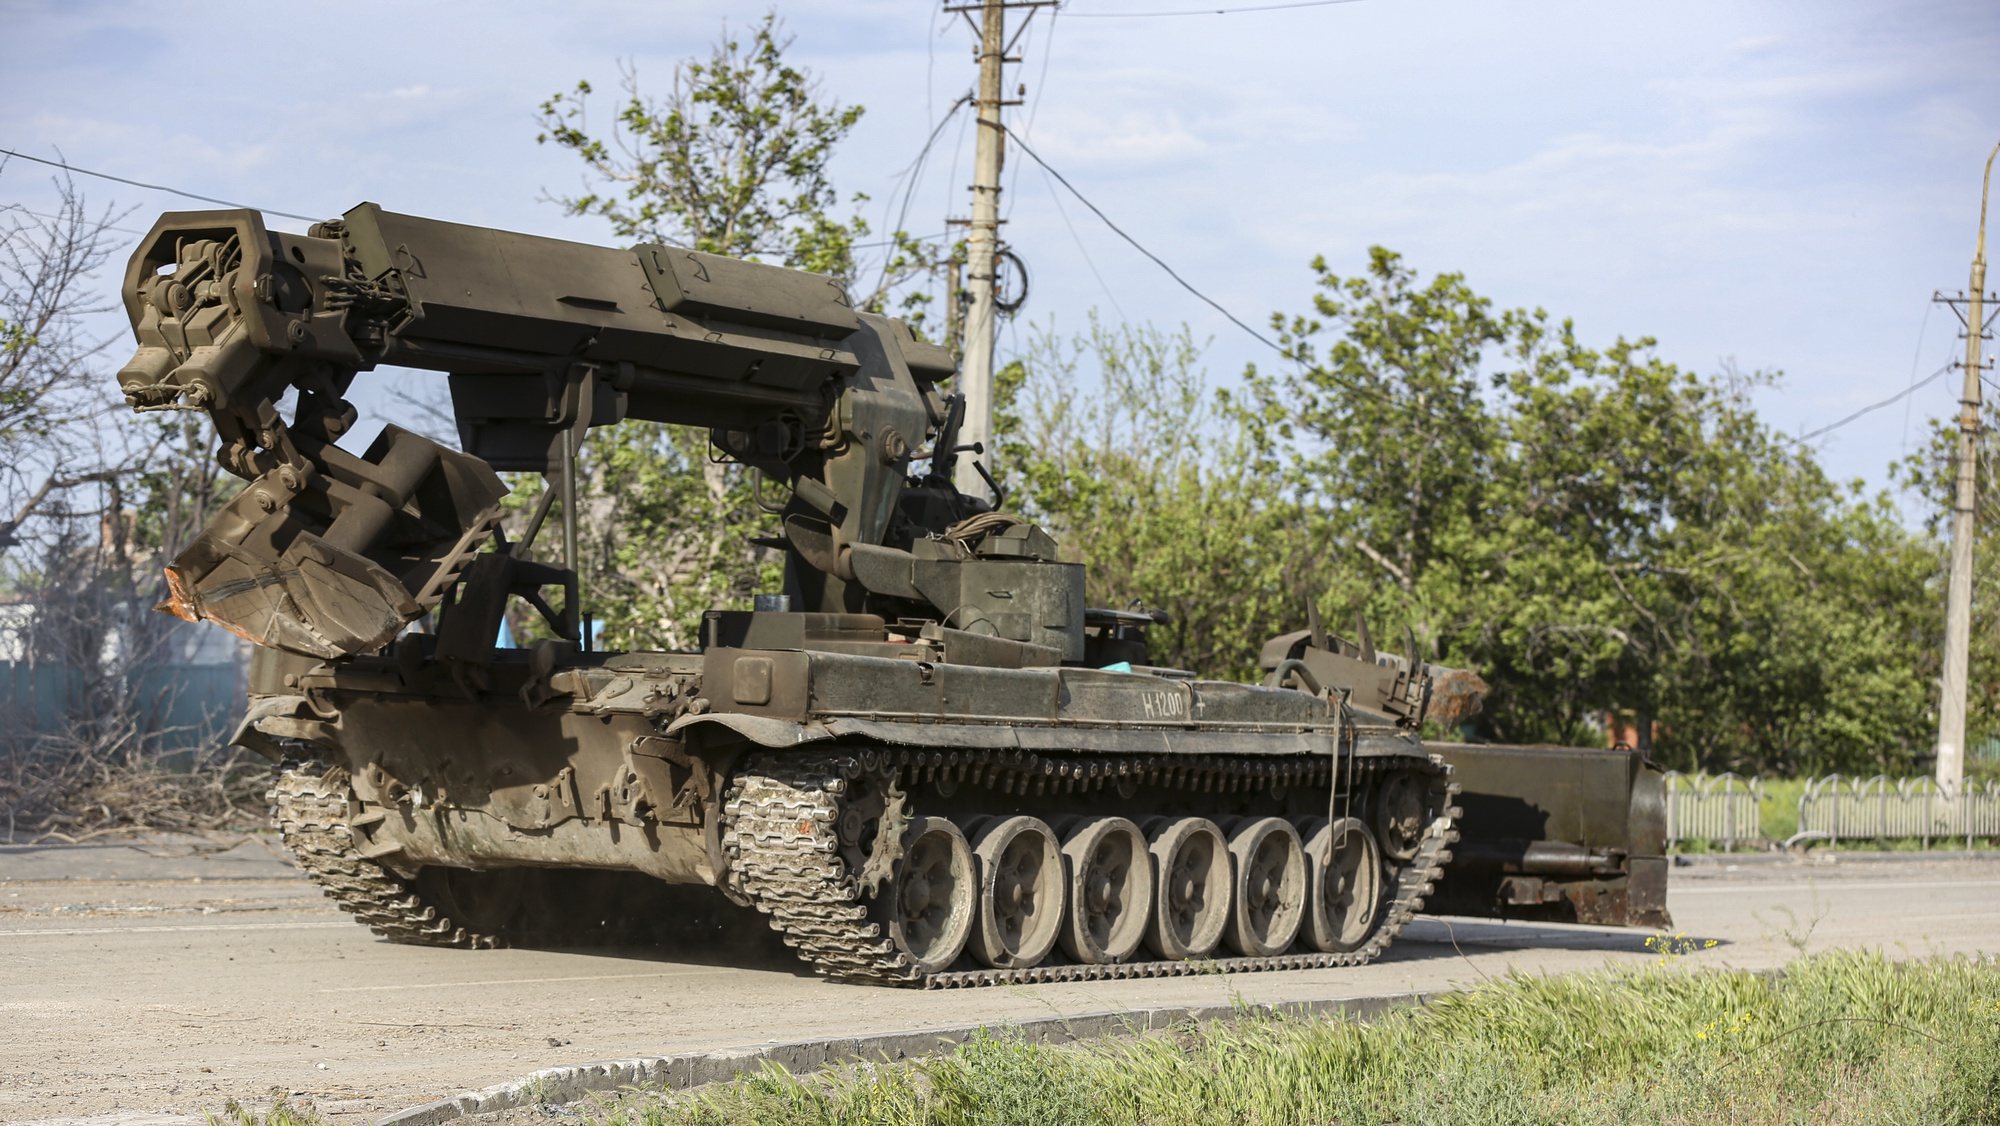 epa09965042 A Russian military vehicle moves towards the area surrounding the Azovstal steel plant to carry out a demining operation in Mariupol, Ukraine, 21 May 2022 (issued 22 May 2022). The Chief spokesman of the Russian Defense Ministry, Major General Igor Konashenkov, said on 20 May that the long-besieged Azovstal steel plant in Mariupol was under full Russian army control.  EPA/ALESSANDRO GUERRA